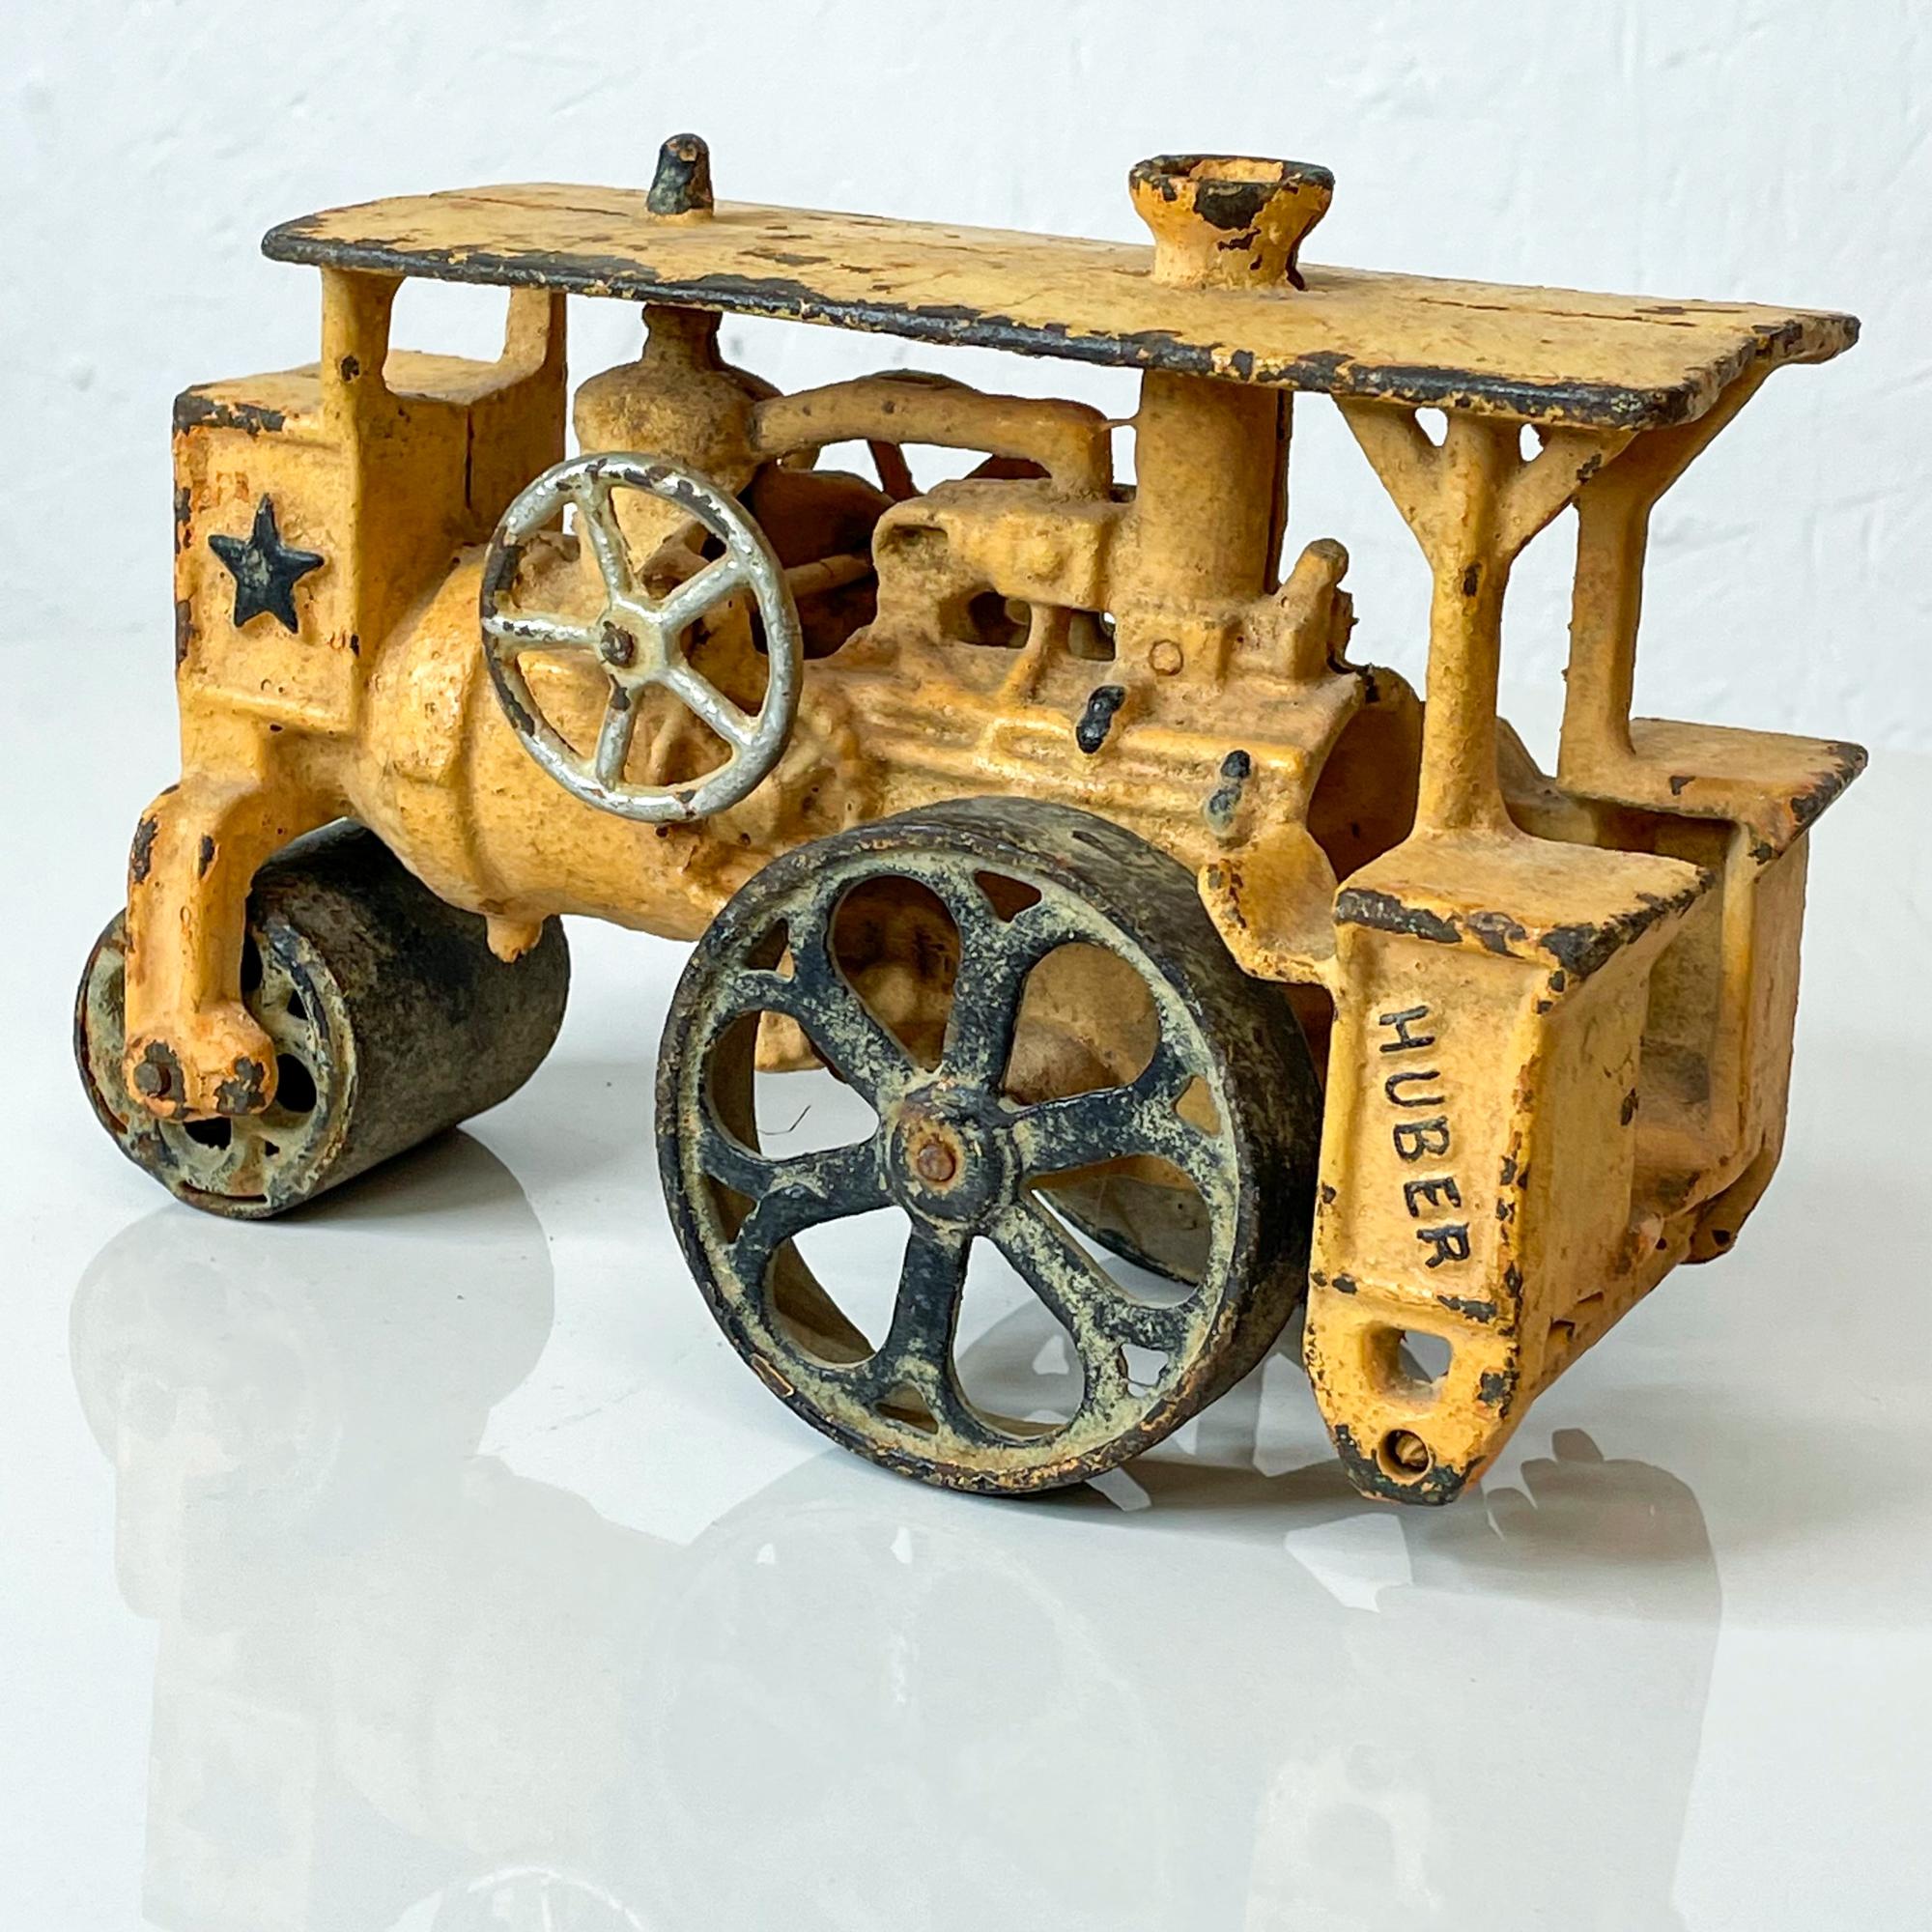 Huber toy work truck antique huber steam driven engine road roller cast iron toy attributed to maker Hubley
Measures: 7.75 L x 3.5 W x 5.25 tall inches
Unrestored vintage condition. Presents as vintage with wear and use.
See images please.
 